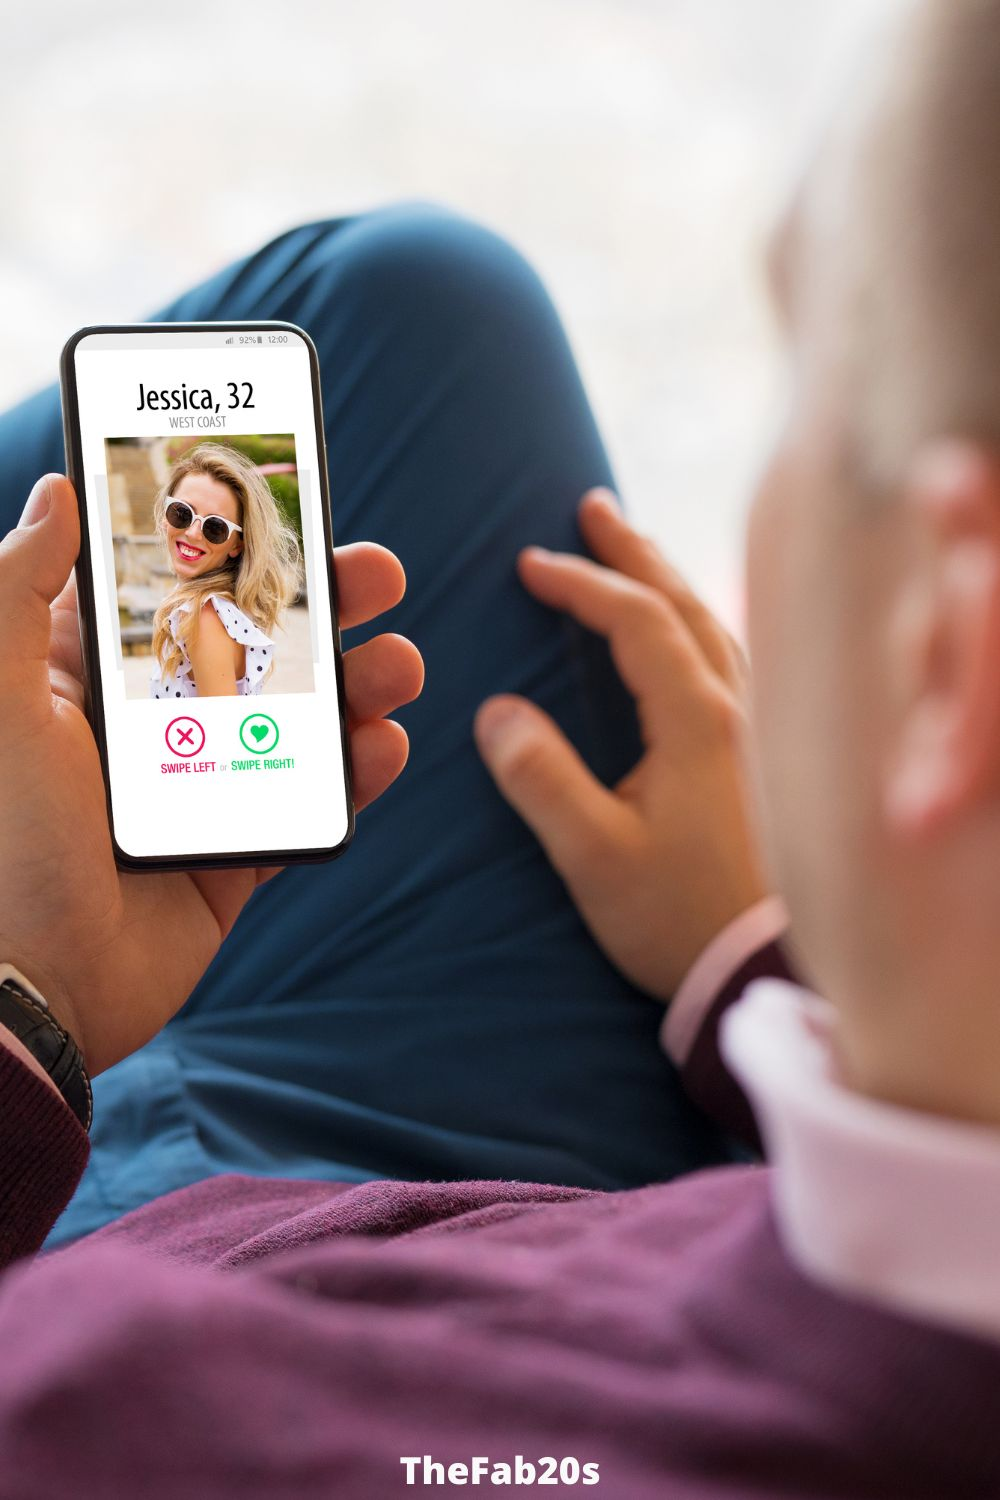 Man on dating app - Featured in Signs He Regrets Sleeping With You